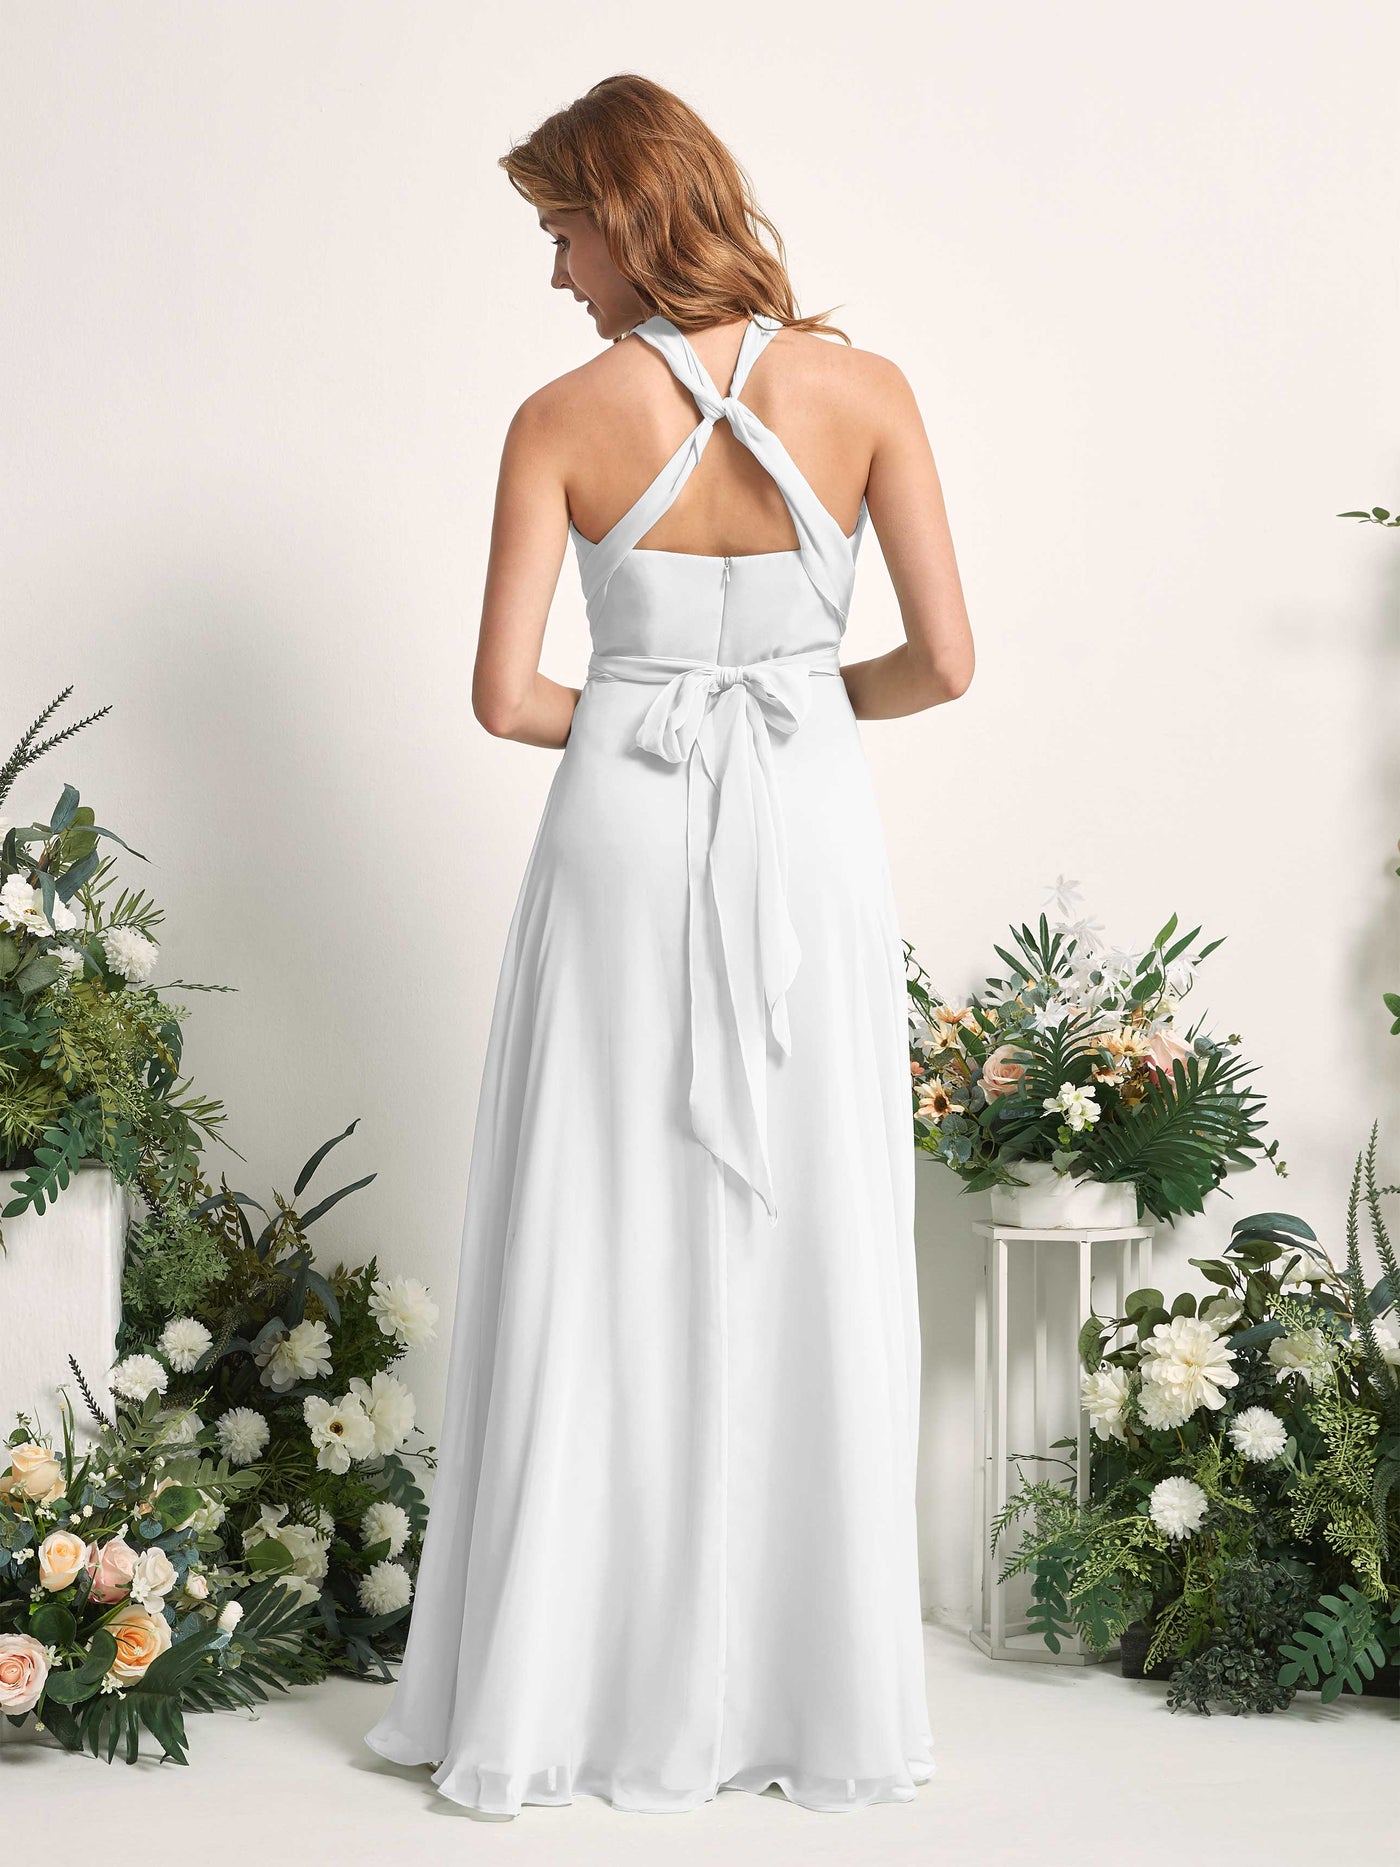 Bridesmaid Dress A-line Chiffon Halter Full Length Short Sleeves Wedding Party Dress - White (81226342)#color_white